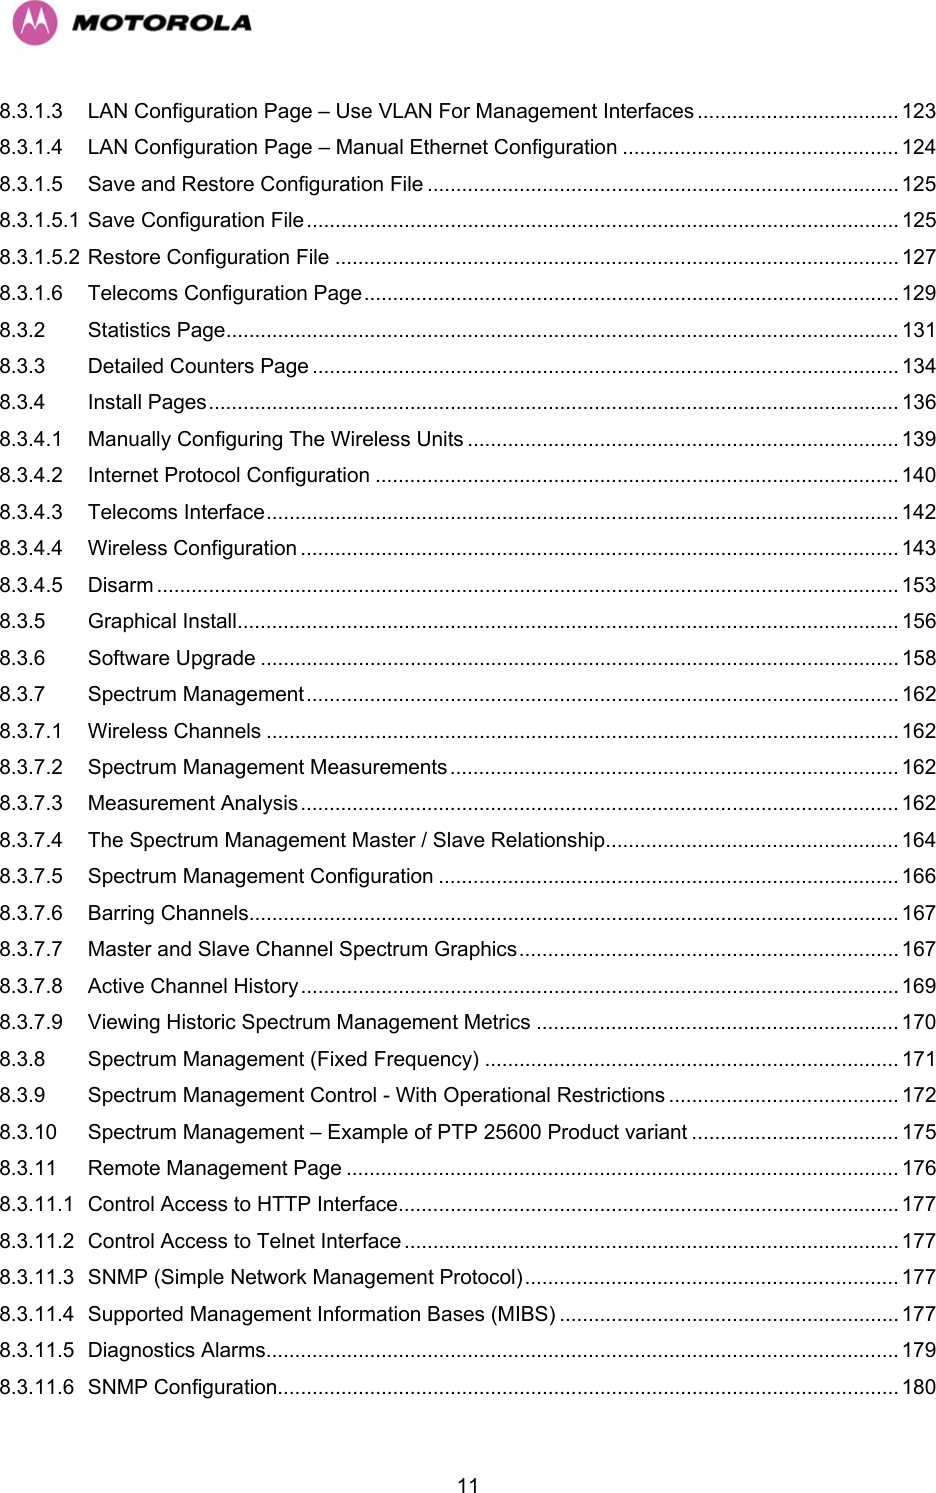   118.3.1.3 LAN Configuration Page – Use VLAN For Management Interfaces ................................... 123 8.3.1.4 LAN Configuration Page – Manual Ethernet Configuration ................................................ 124 8.3.1.5 Save and Restore Configuration File .................................................................................. 125 8.3.1.5.1 Save Configuration File ....................................................................................................... 125 8.3.1.5.2 Restore Configuration File .................................................................................................. 127 8.3.1.6 Telecoms Configuration Page............................................................................................. 129 8.3.2 Statistics Page..................................................................................................................... 131 8.3.3 Detailed Counters Page ...................................................................................................... 134 8.3.4 Install Pages........................................................................................................................ 136 8.3.4.1 Manually Configuring The Wireless Units ........................................................................... 139 8.3.4.2 Internet Protocol Configuration ...........................................................................................140 8.3.4.3 Telecoms Interface..............................................................................................................142 8.3.4.4 Wireless Configuration ........................................................................................................ 143 8.3.4.5 Disarm ................................................................................................................................. 153 8.3.5 Graphical Install................................................................................................................... 156 8.3.6 Software Upgrade ............................................................................................................... 158 8.3.7 Spectrum Management....................................................................................................... 162 8.3.7.1 Wireless Channels ..............................................................................................................162 8.3.7.2 Spectrum Management Measurements.............................................................................. 162 8.3.7.3 Measurement Analysis........................................................................................................ 162 8.3.7.4 The Spectrum Management Master / Slave Relationship................................................... 164 8.3.7.5 Spectrum Management Configuration ................................................................................ 166 8.3.7.6 Barring Channels................................................................................................................. 167 8.3.7.7 Master and Slave Channel Spectrum Graphics.................................................................. 167 8.3.7.8 Active Channel History ........................................................................................................ 169 8.3.7.9 Viewing Historic Spectrum Management Metrics ............................................................... 170 8.3.8 Spectrum Management (Fixed Frequency) ........................................................................ 171 8.3.9 Spectrum Management Control - With Operational Restrictions ........................................ 172 8.3.10 Spectrum Management – Example of PTP 25600 Product variant .................................... 175 8.3.11 Remote Management Page ................................................................................................ 176 8.3.11.1 Control Access to HTTP Interface....................................................................................... 177 8.3.11.2 Control Access to Telnet Interface ...................................................................................... 177 8.3.11.3 SNMP (Simple Network Management Protocol)................................................................. 177 8.3.11.4 Supported Management Information Bases (MIBS) ........................................................... 177 8.3.11.5 Diagnostics Alarms..............................................................................................................179 8.3.11.6 SNMP Configuration............................................................................................................ 180 